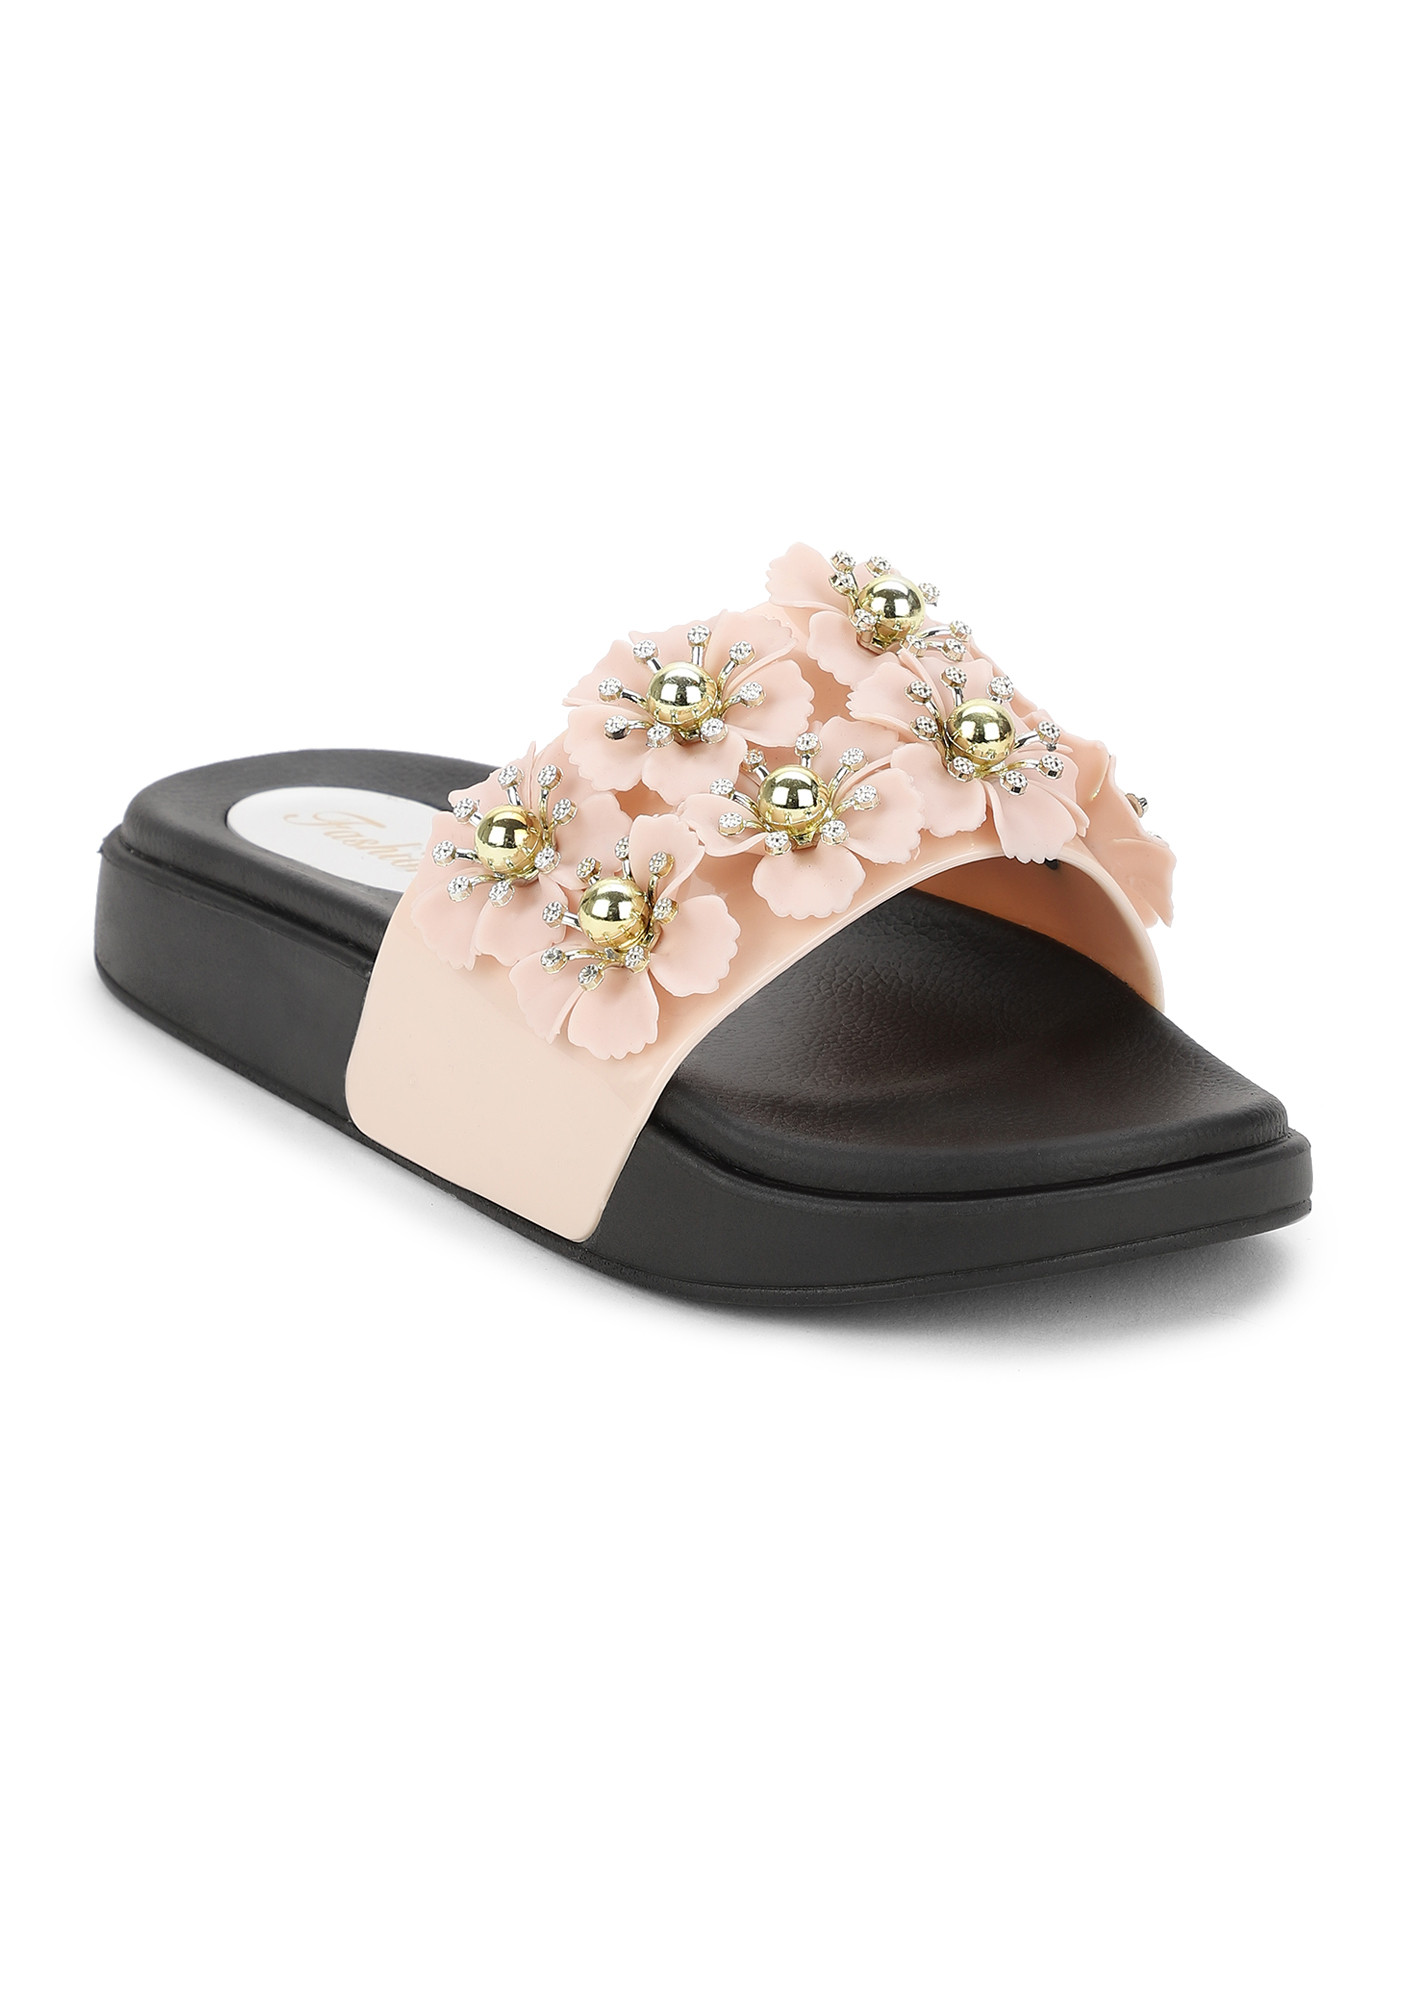 NOT YOUR BASIC STUDS PINK SLIDERS